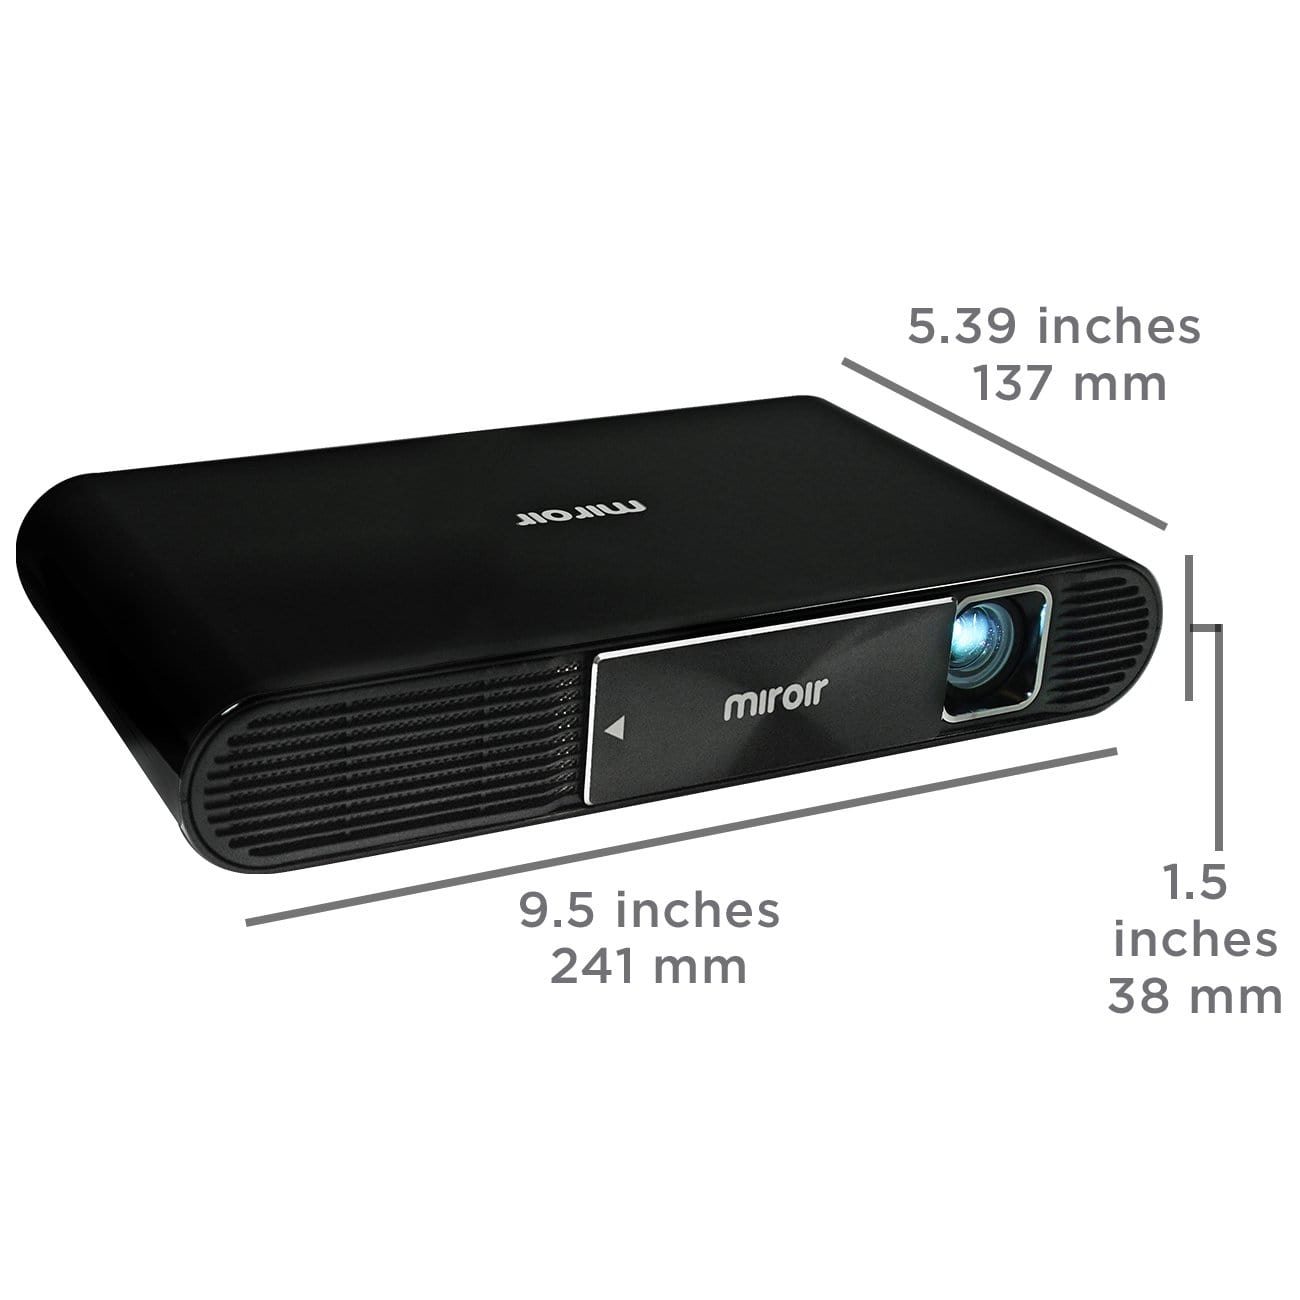 Miroir M631 Ultra Pro 1080p Projector, 700 LED Lumens, Battery-Powered, USB Type C Video and Charge